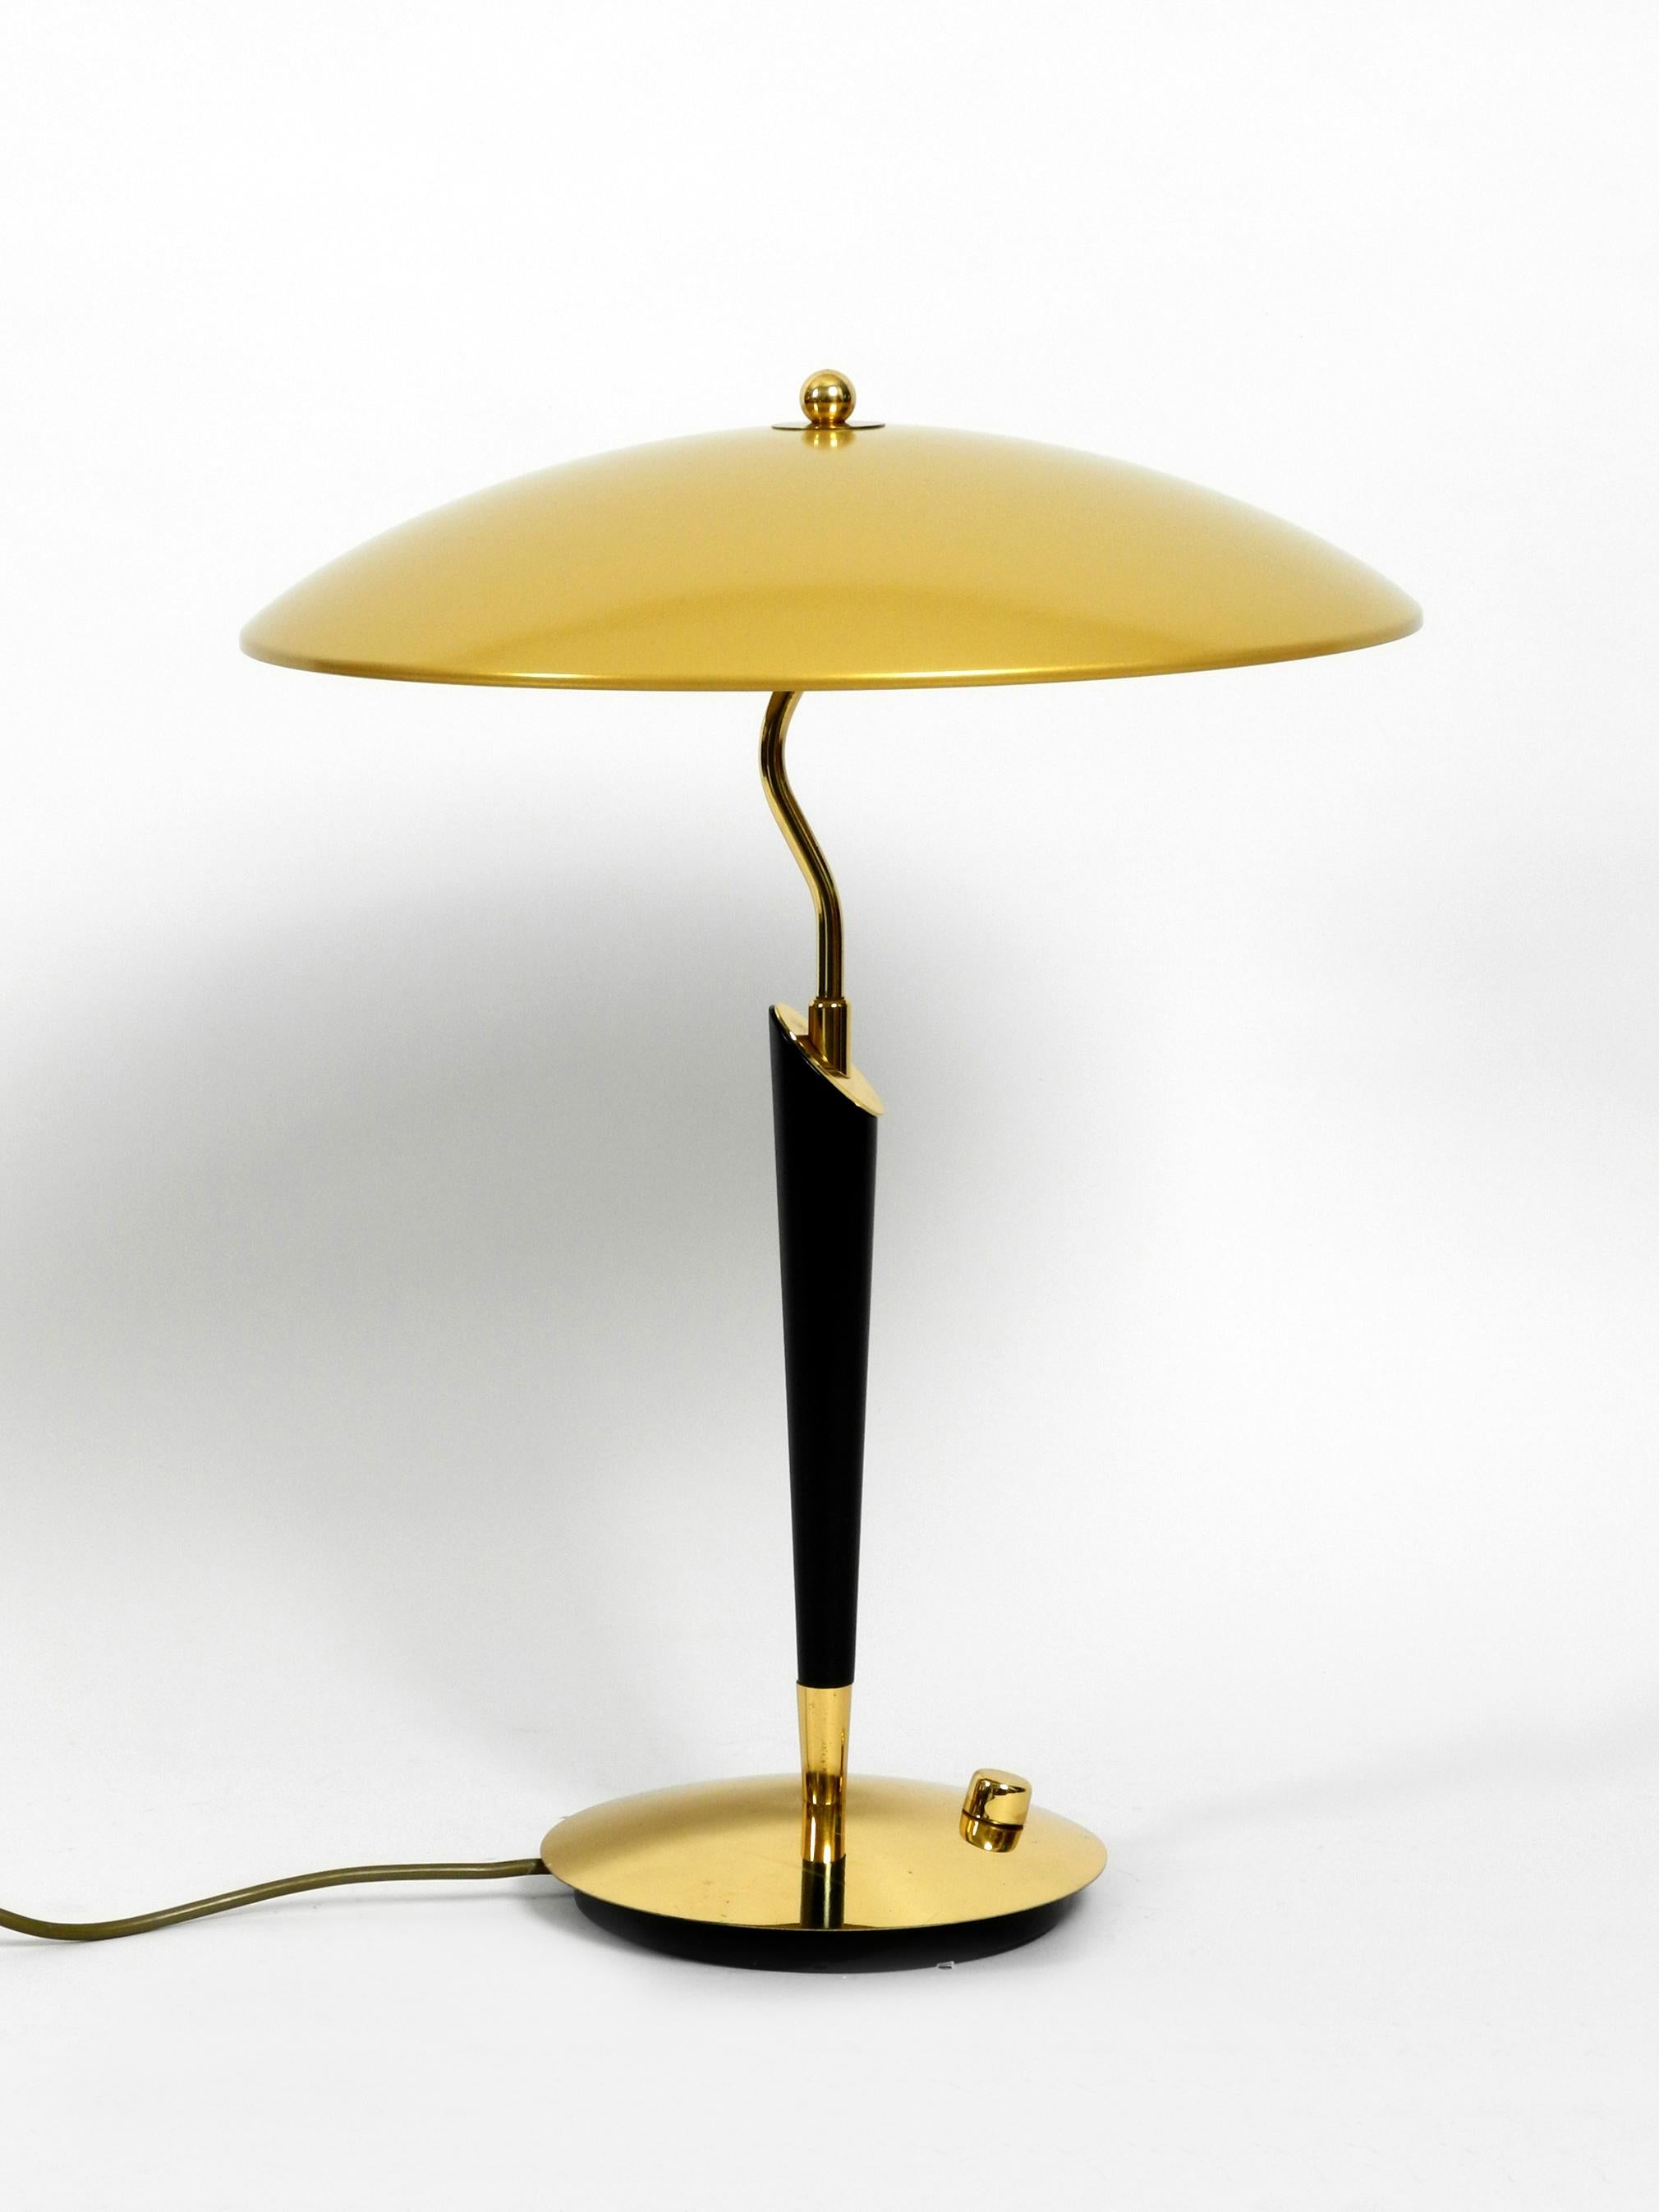 Mid-Century Modern Elegant Heavy Extra Large Brass Table Lamp from the 1960s by Hillebrand